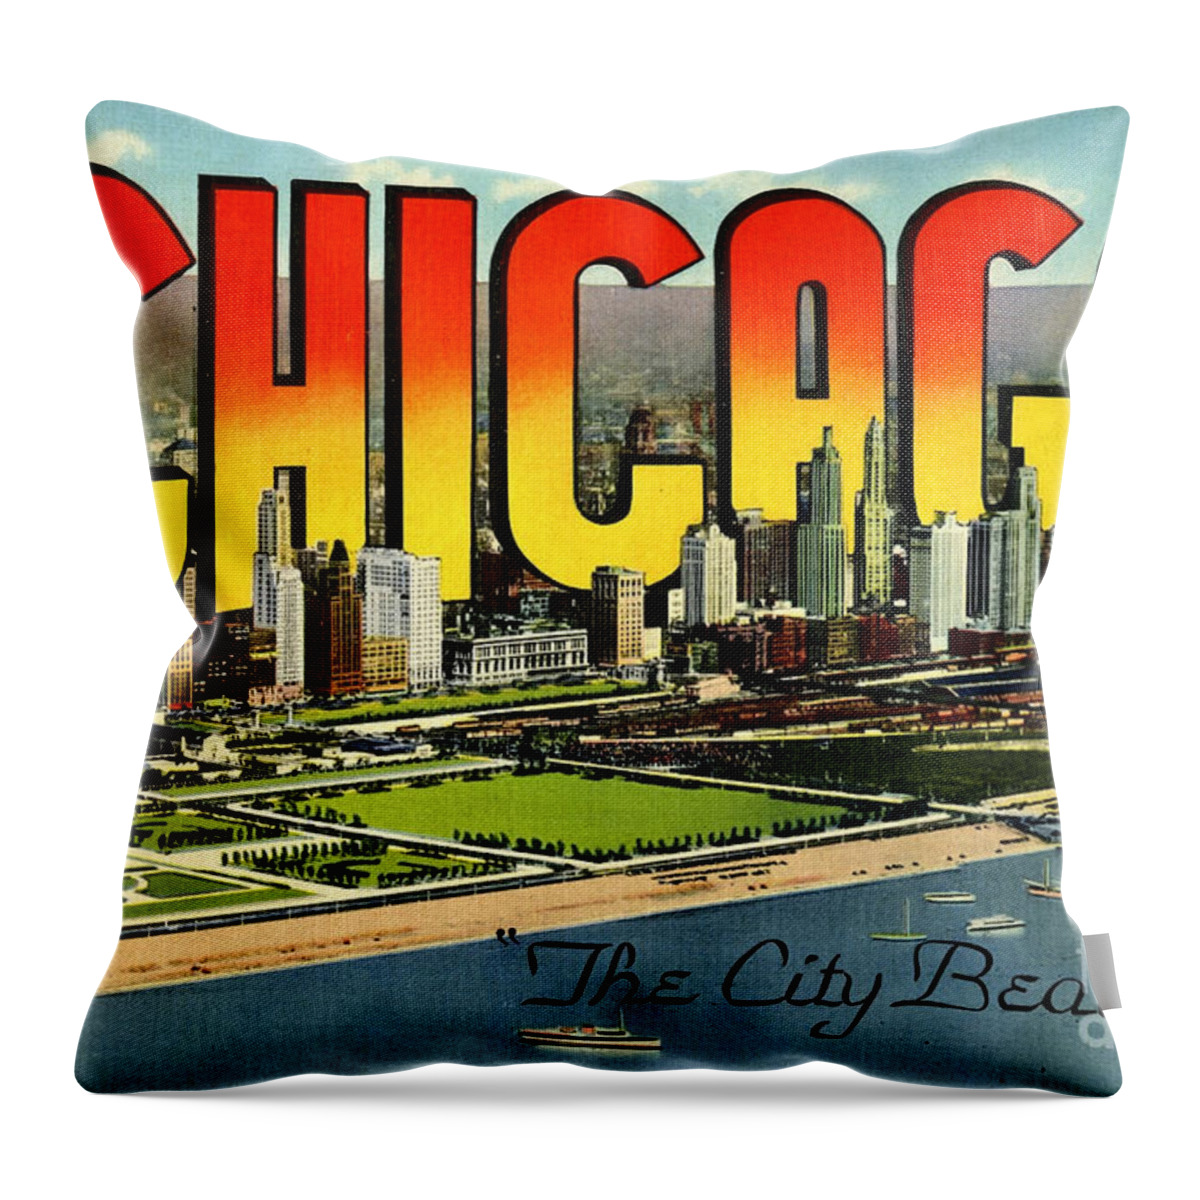 Retro Throw Pillow featuring the photograph Retro Chicago Poster #2 by Action